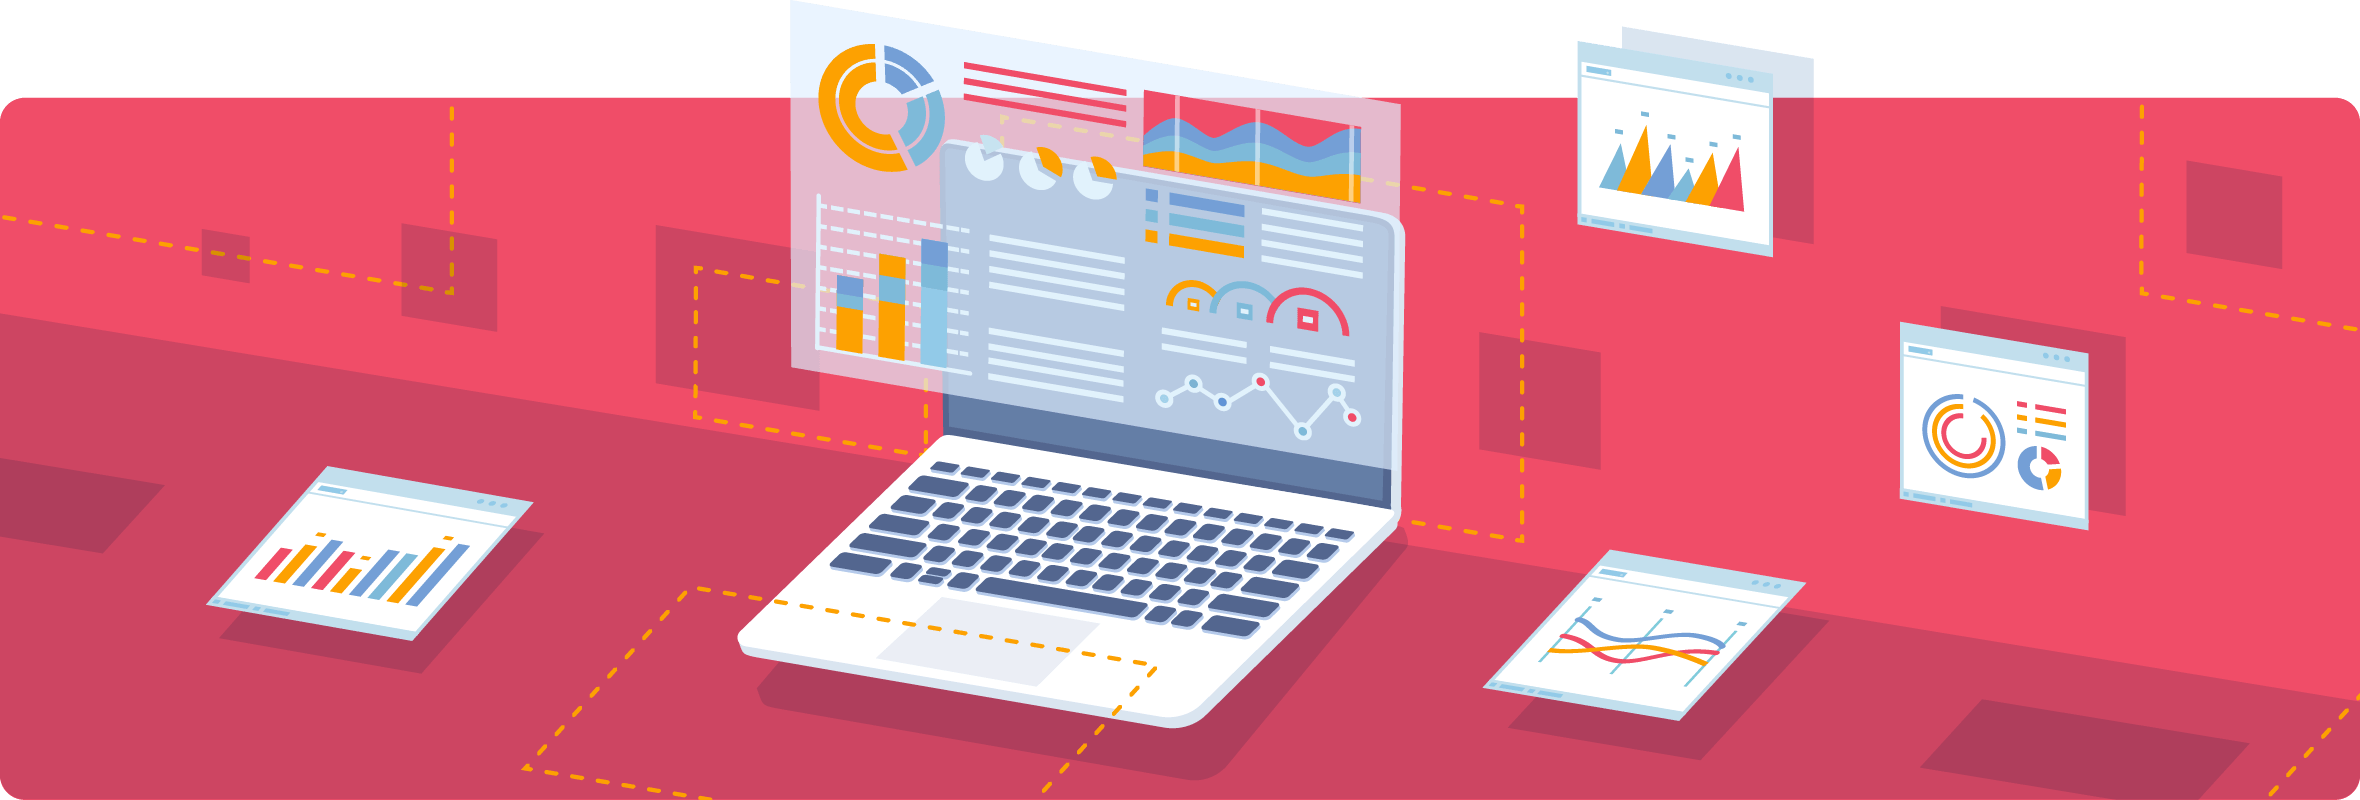 Every law practice can use dashboards to easily track financial metrics, make informed decisions, and grow their business.